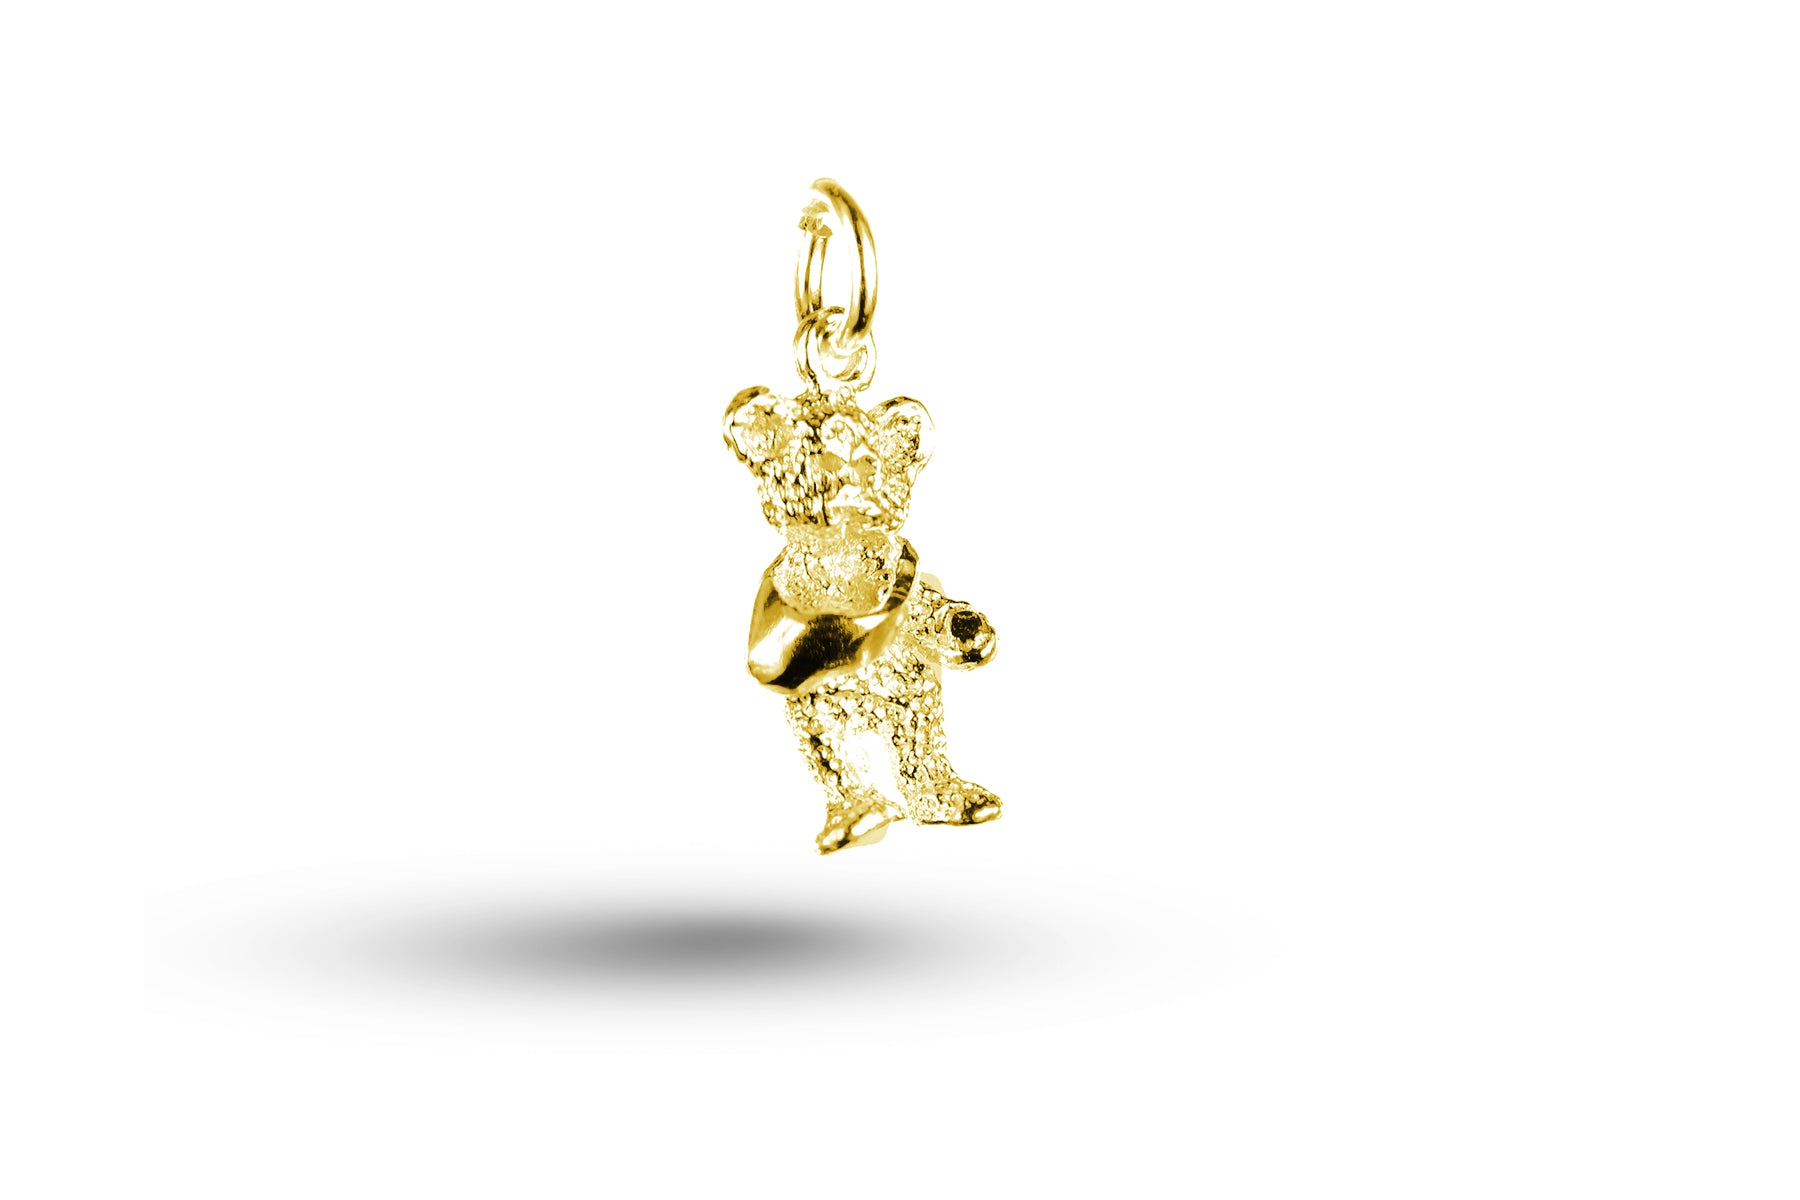 Yellow gold Ted with Arm in Sling charm.